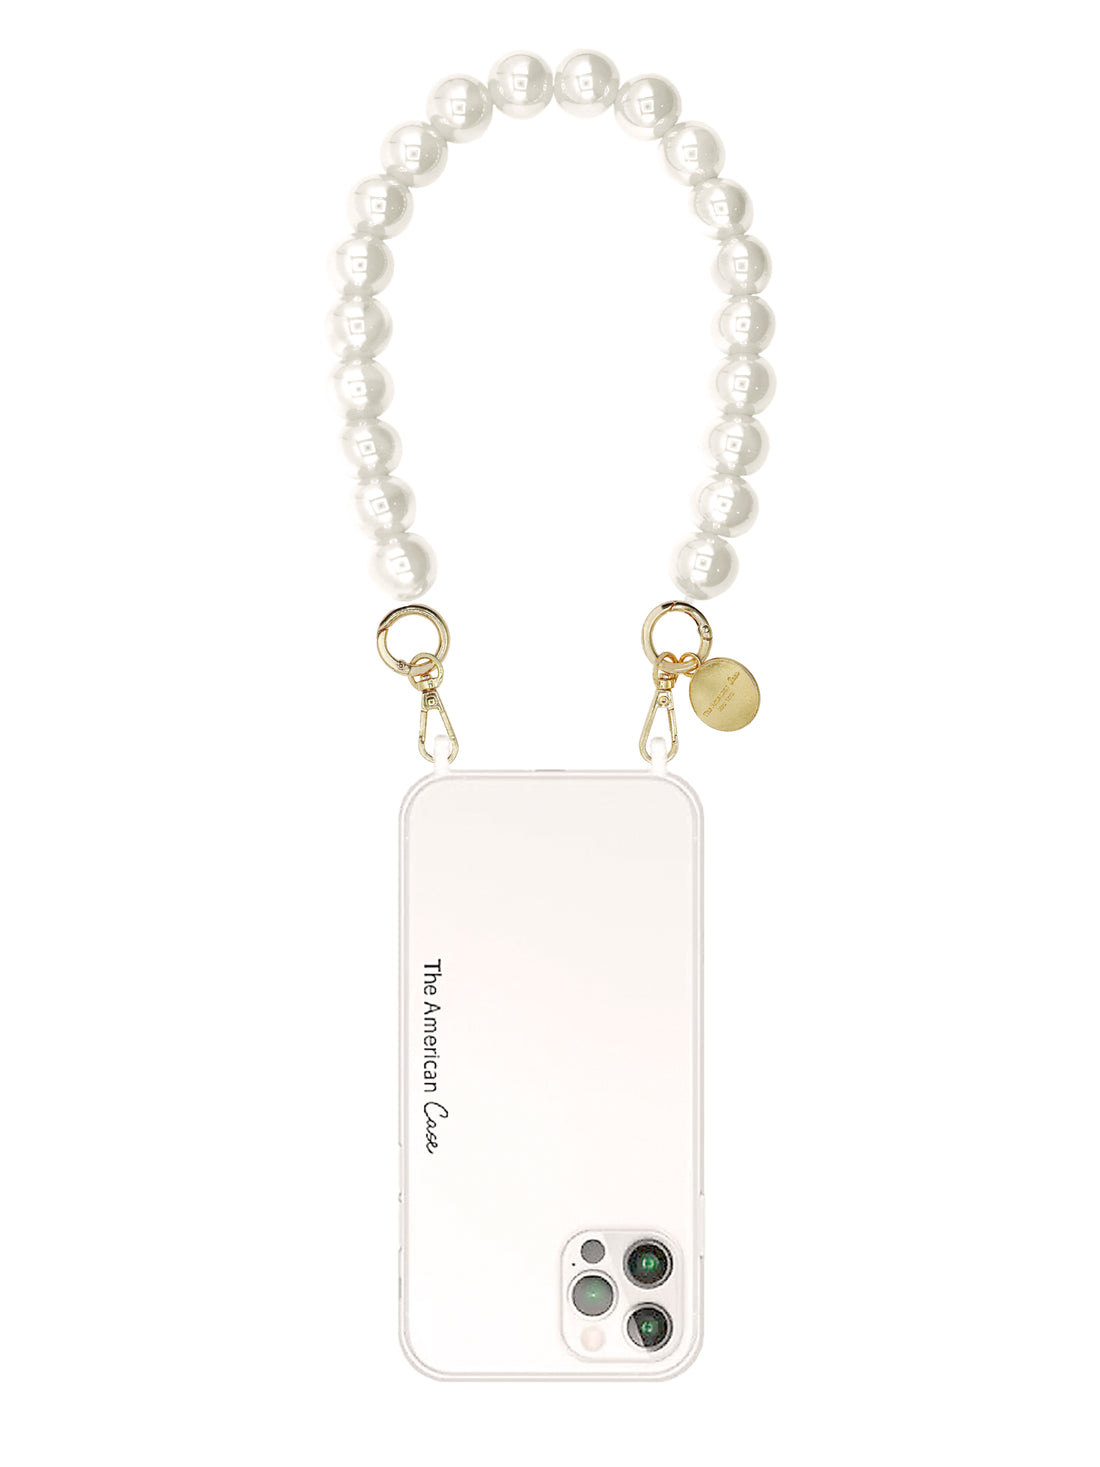 Rayna - Shiny Bead Short Phone Chain with Golden Carabiners